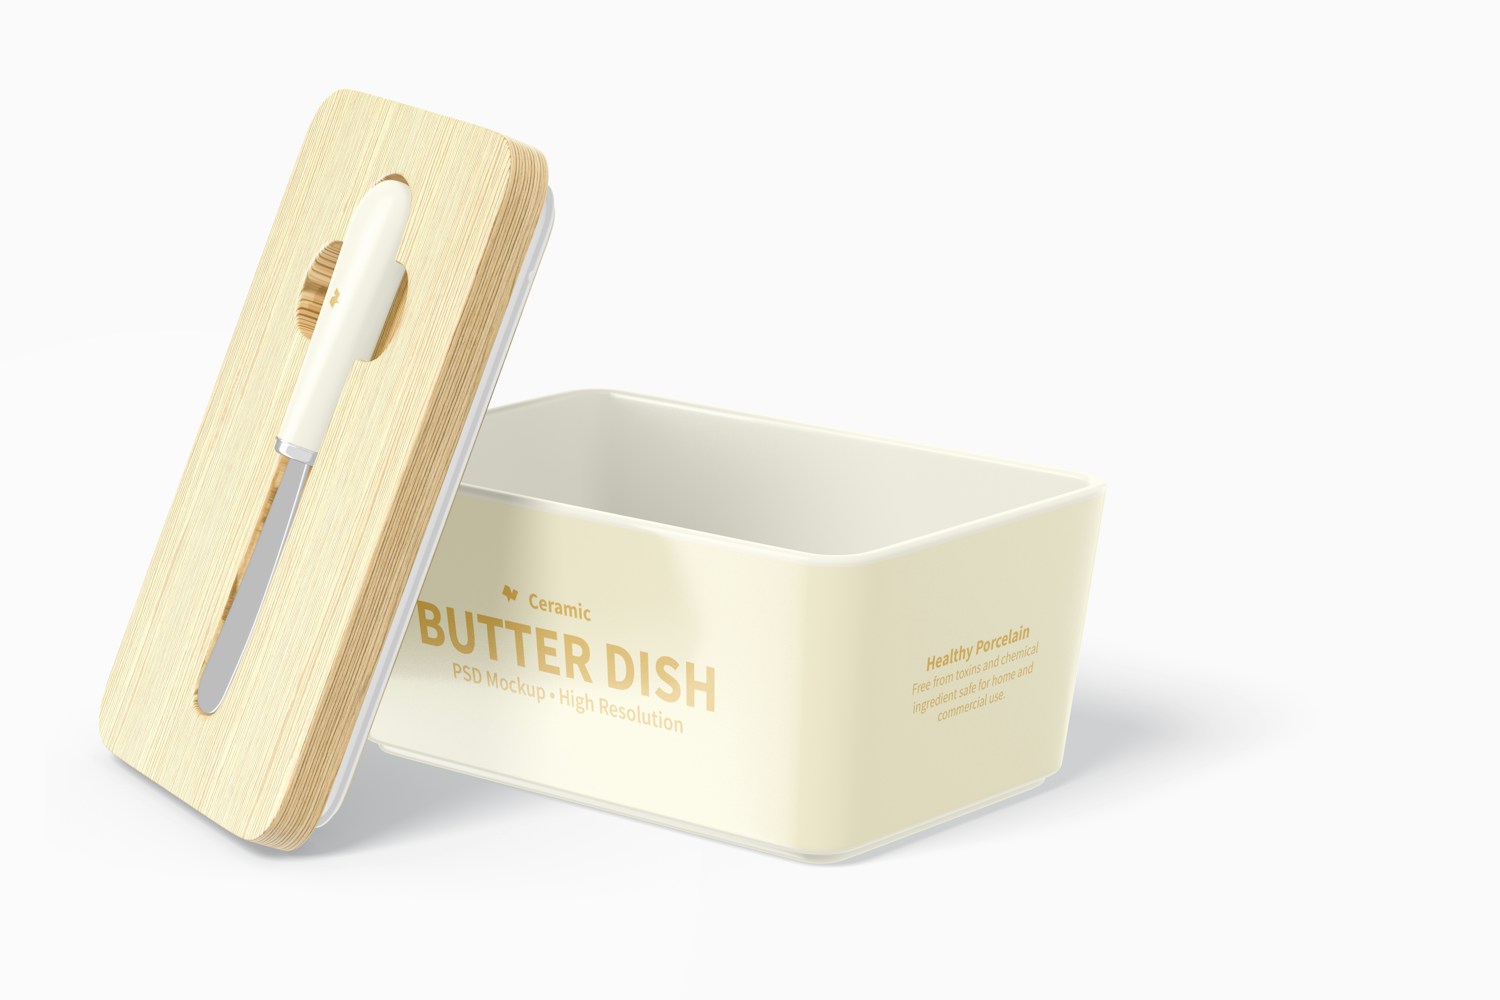 Ceramic Butter Dish with Bamboo Lid Mockup, Opened